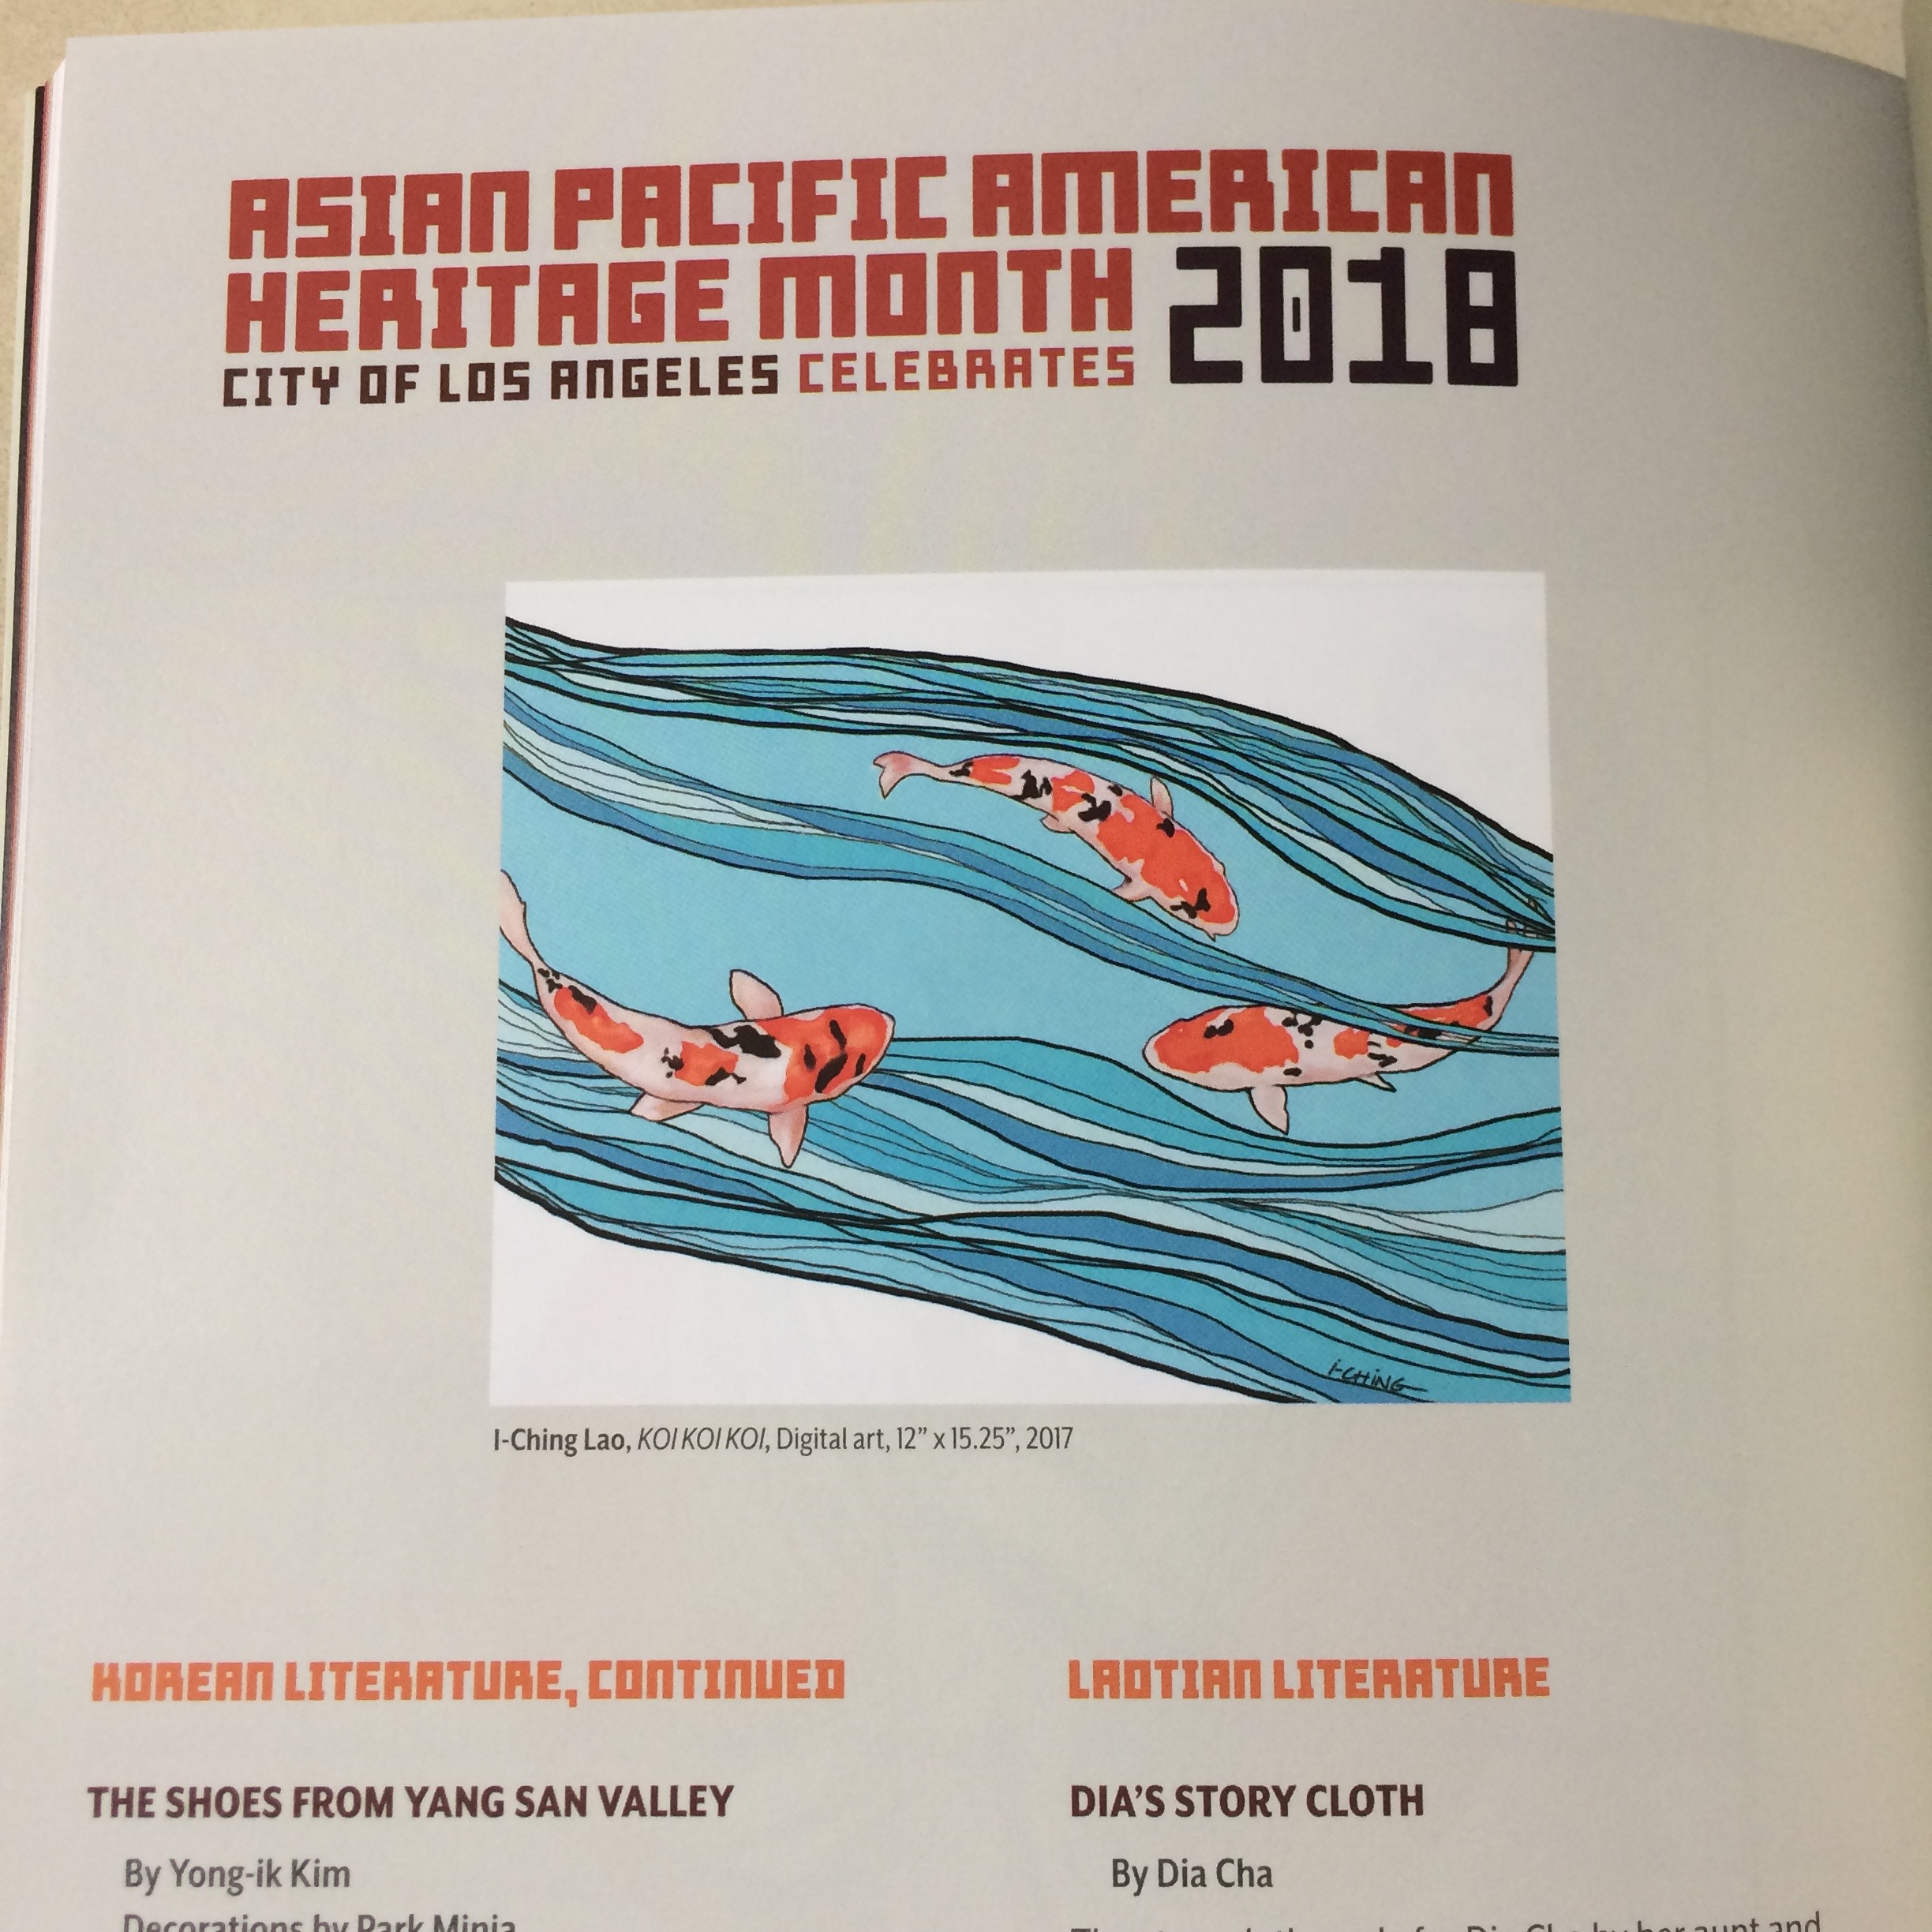 Asian Pacific American Heritage Month Cultural Guide 2018